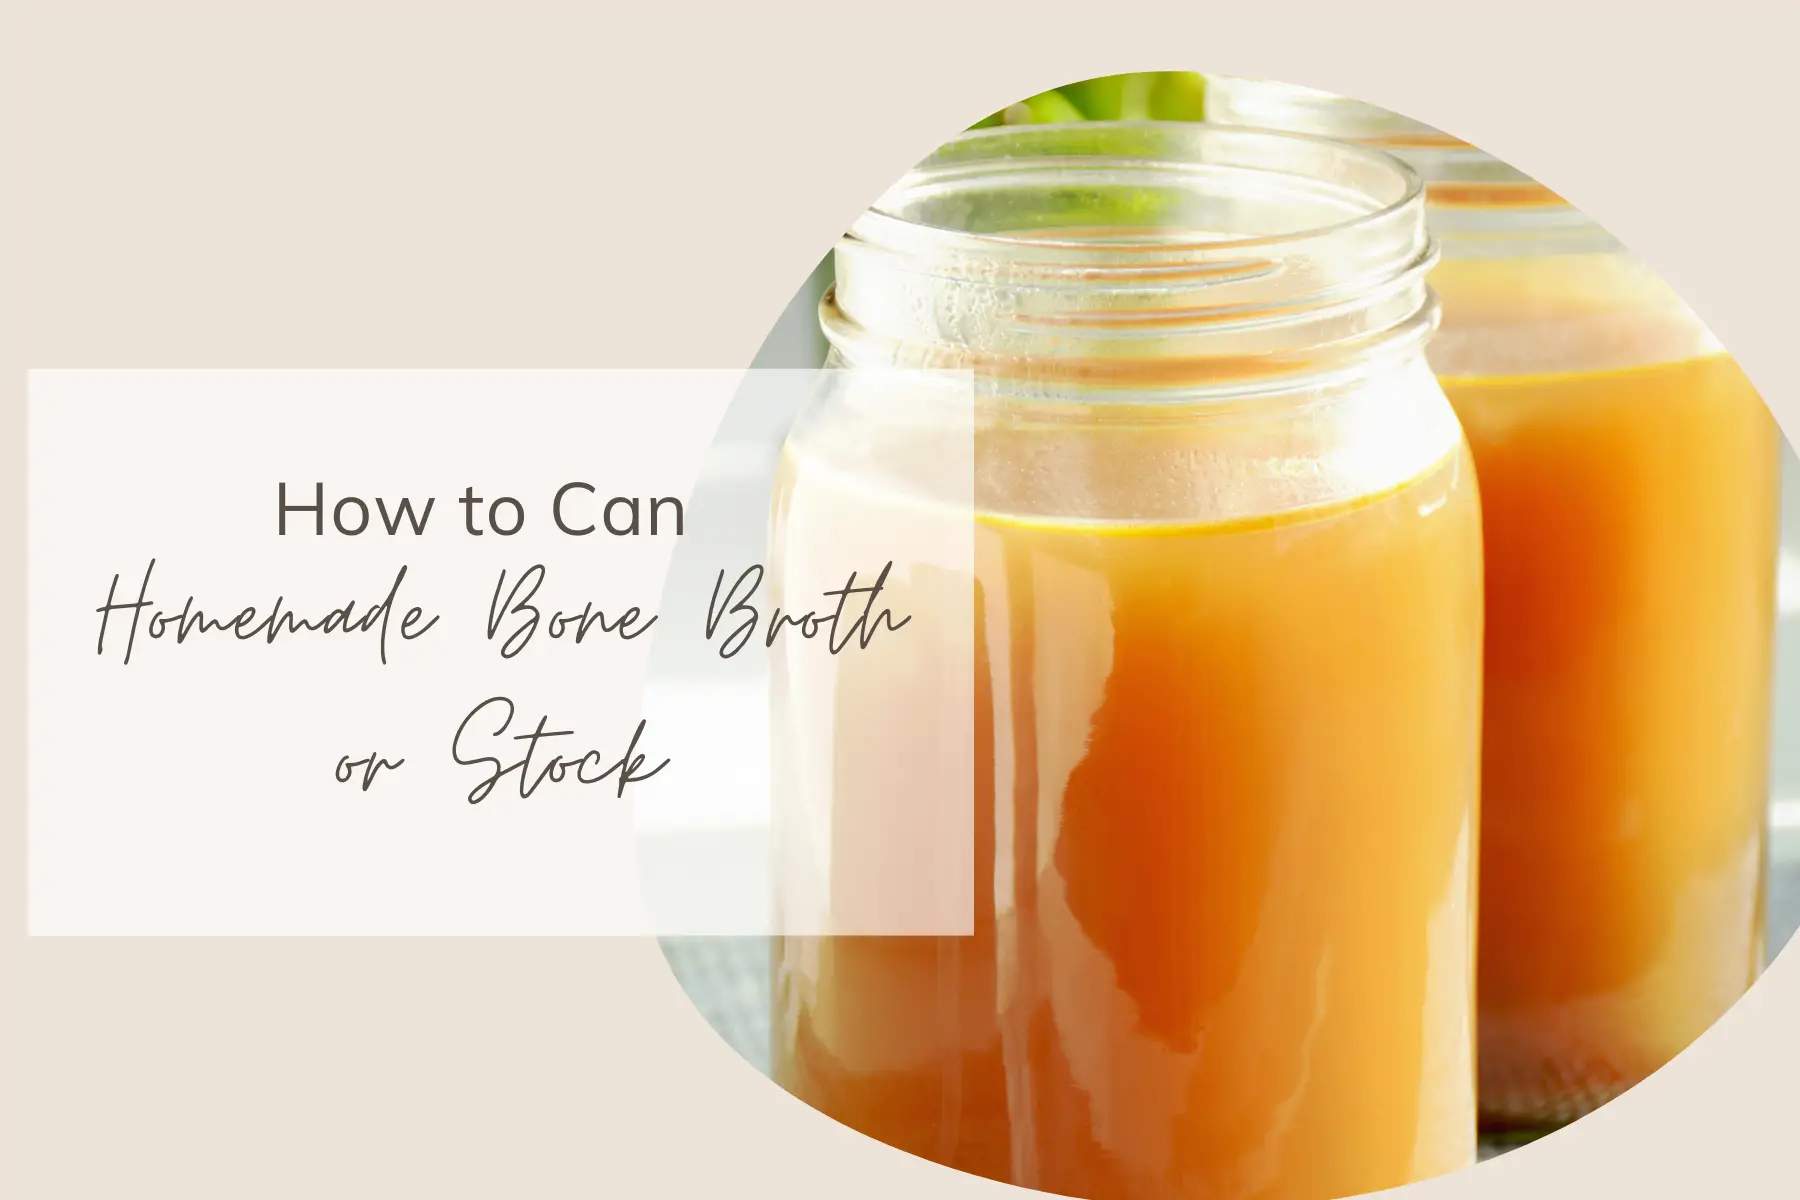 How to Can Homemade Bone Broth or Stock